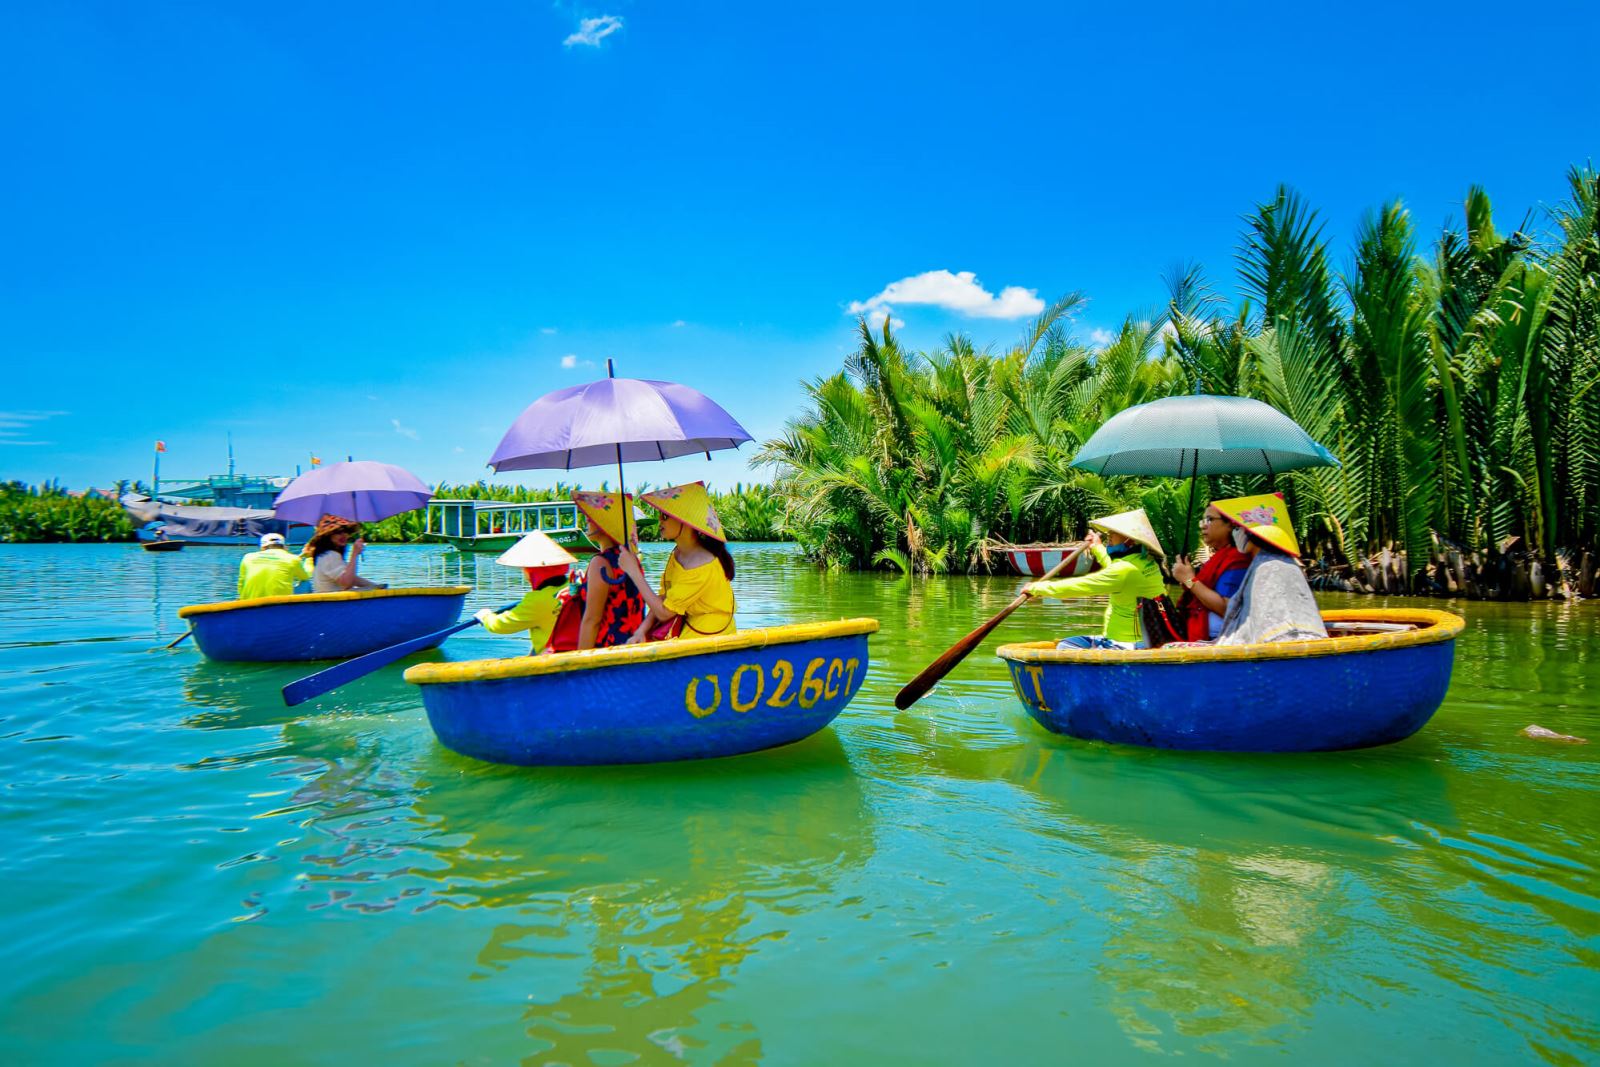 Hoi an boating tour